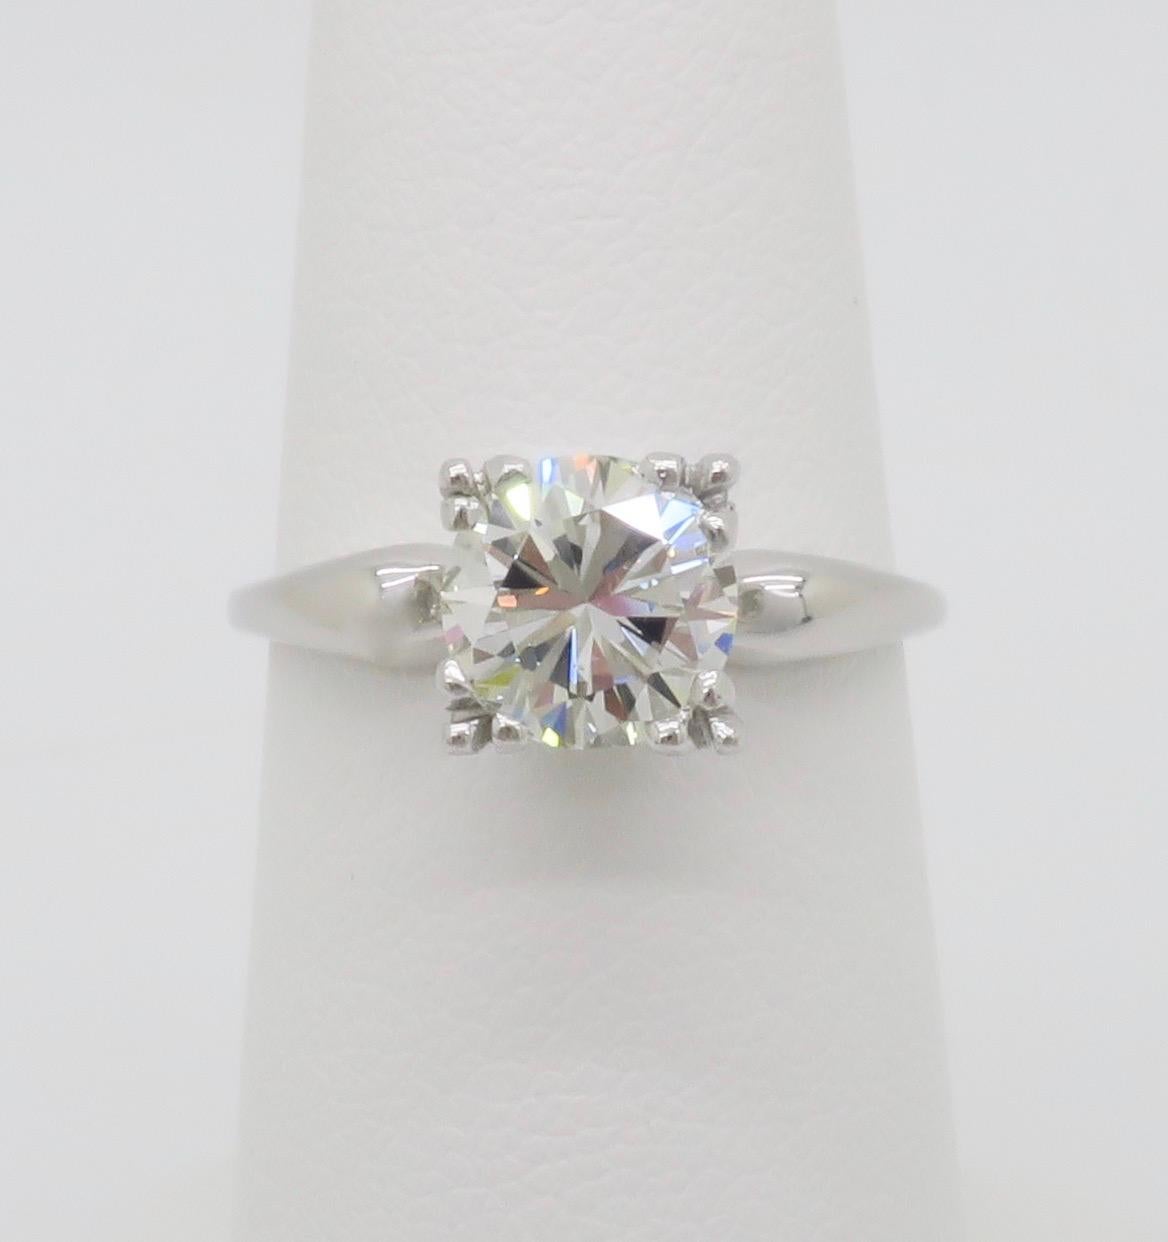 Vintage diamond solitaire ring featuring a beautiful 1.45ct Earth Mined Round Brilliant cut diamond. 

Center Diamond Carat Weight: 1.45CT 
Center Diamond Cut: Round Brilliant Cut  
Center Diamond Color: I
Center Diamond Clarity: VS2
Metal: 14k